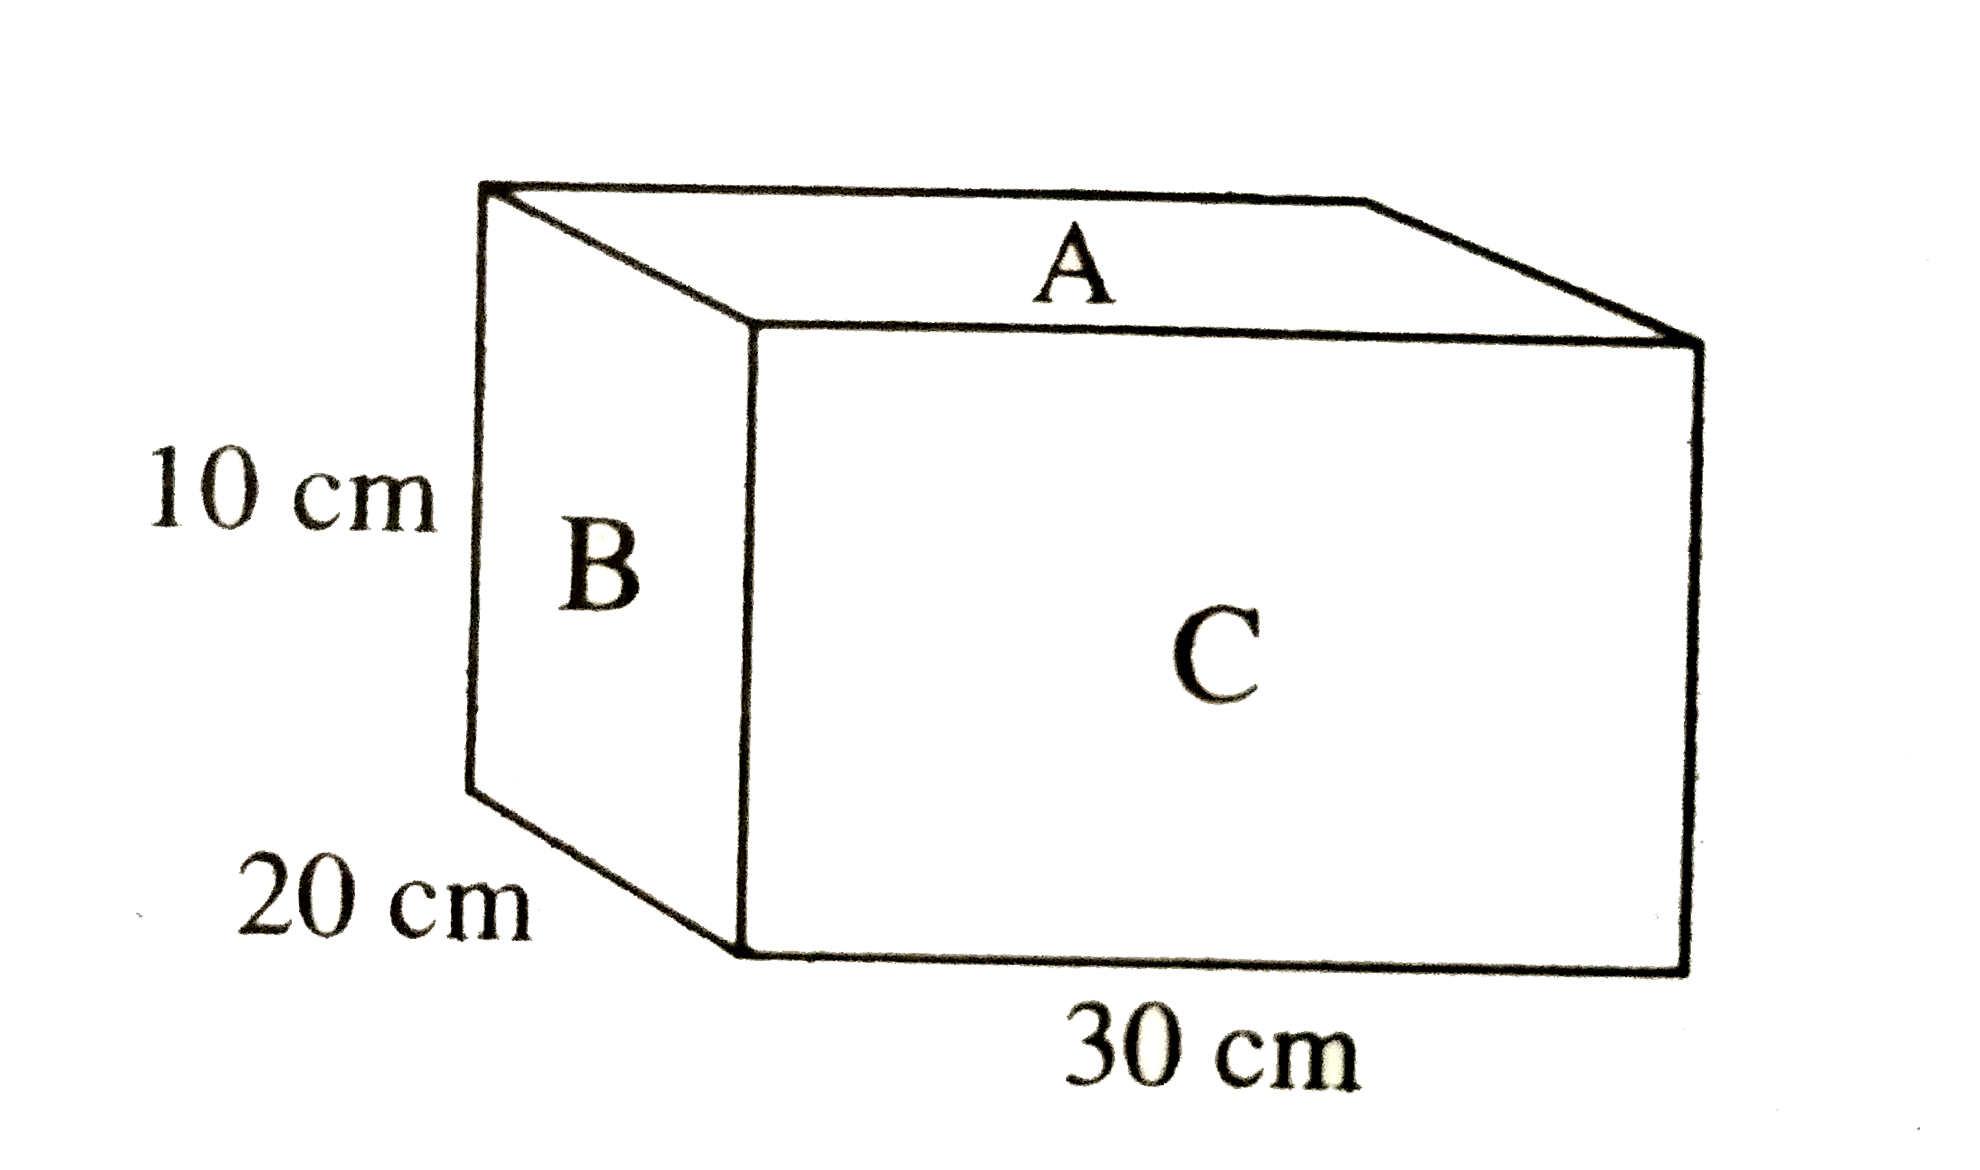 A block, resting on the ground, has the dimensions as shown in the diagram. The face which experiences the smallest stress, when the block rests on that face is